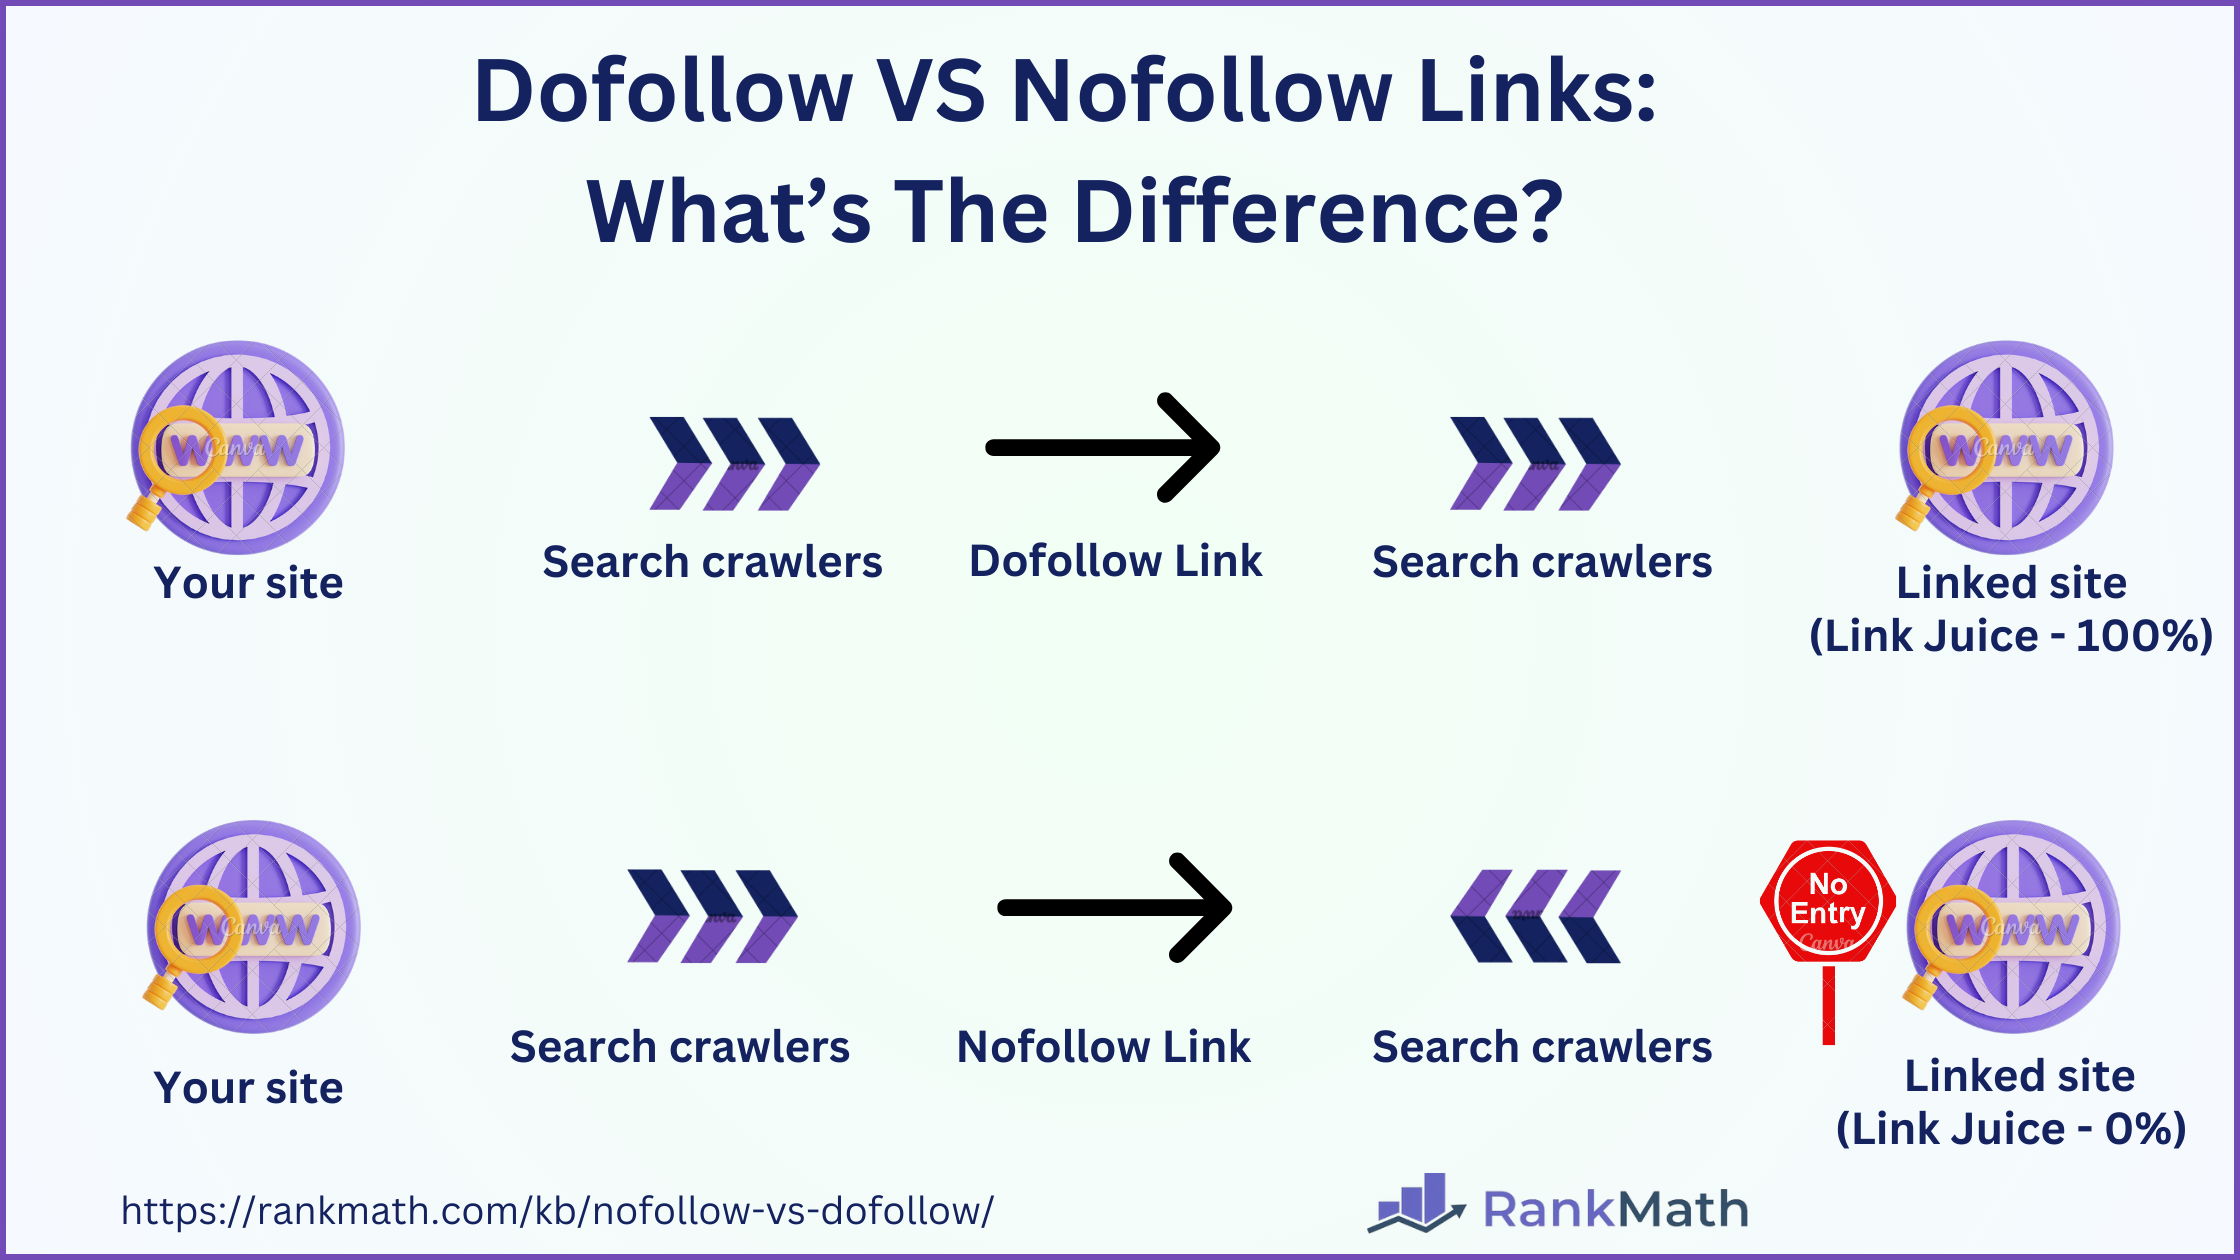 Dofollow VS. Nofollow links: What's the difference?